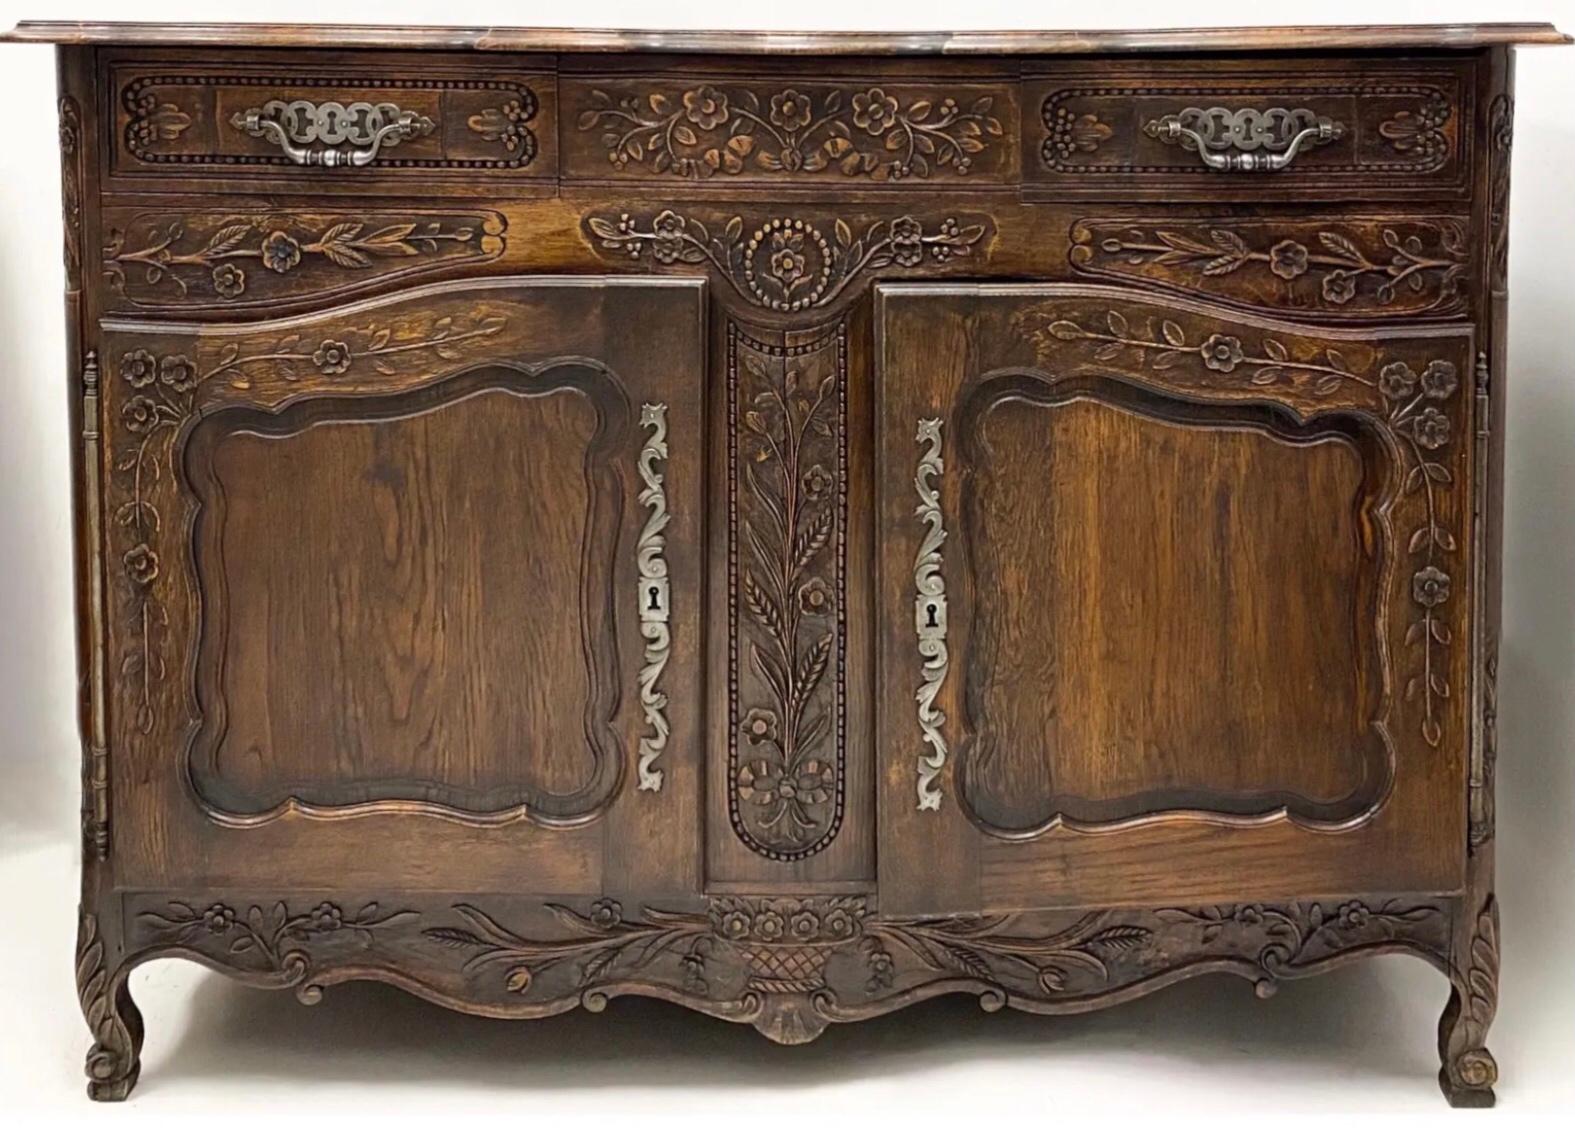 19th Century 19th-C. French Louis XV Style Carved Oak Cabinet or Buffet / Sideboard